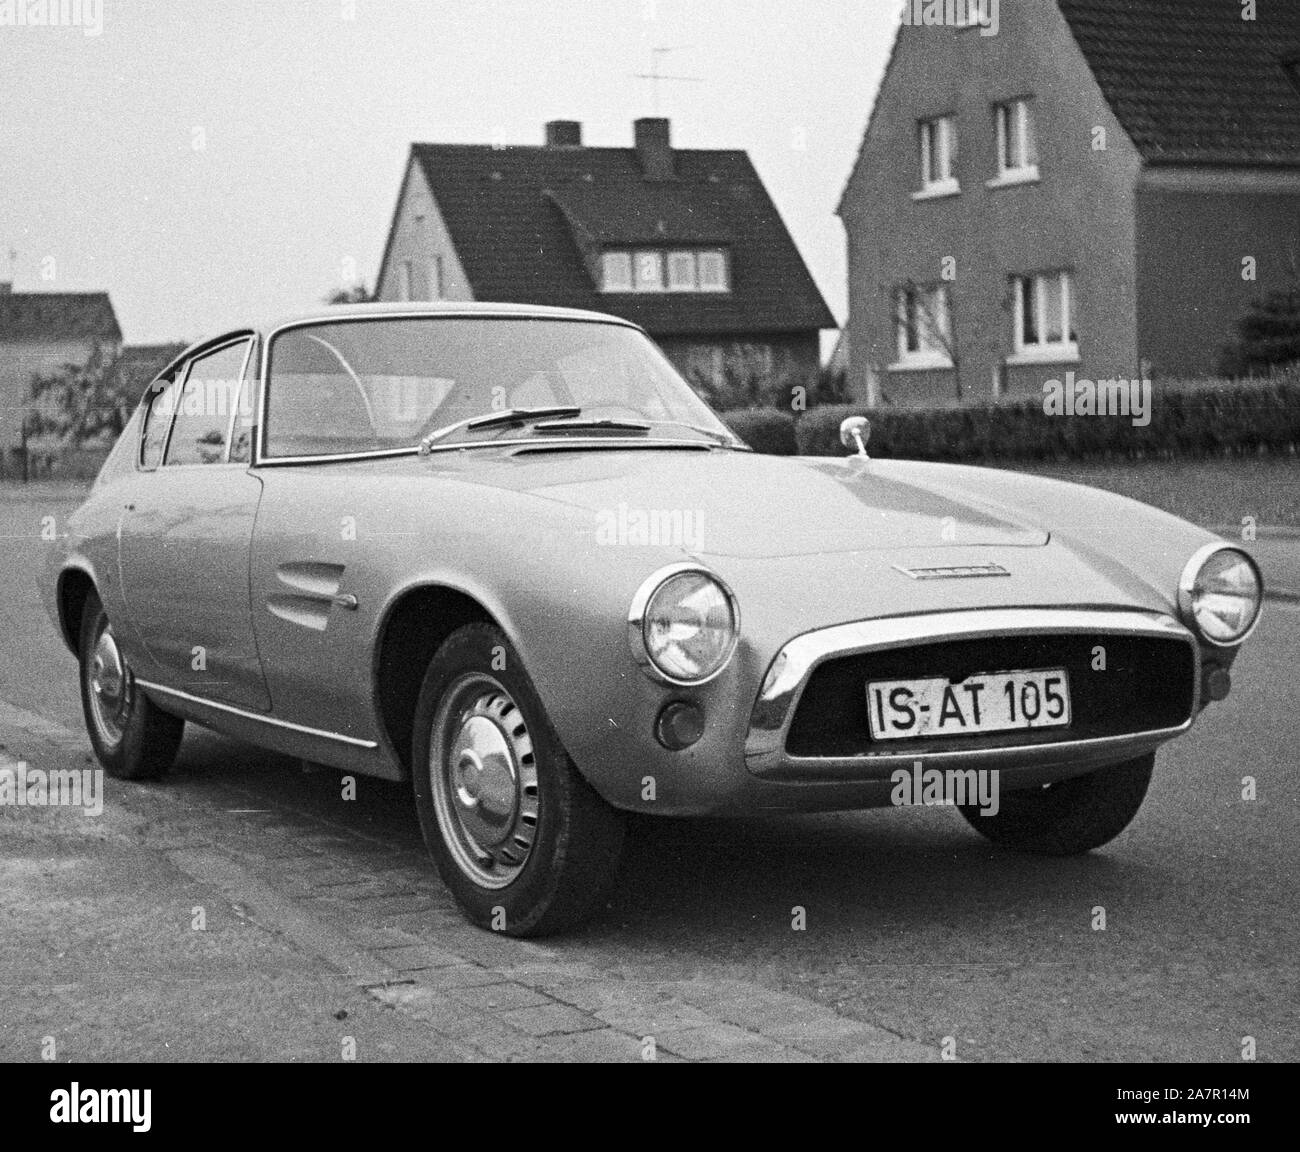 Fiat 1500 GT Ghia Coupe from the 60s Stock Photo